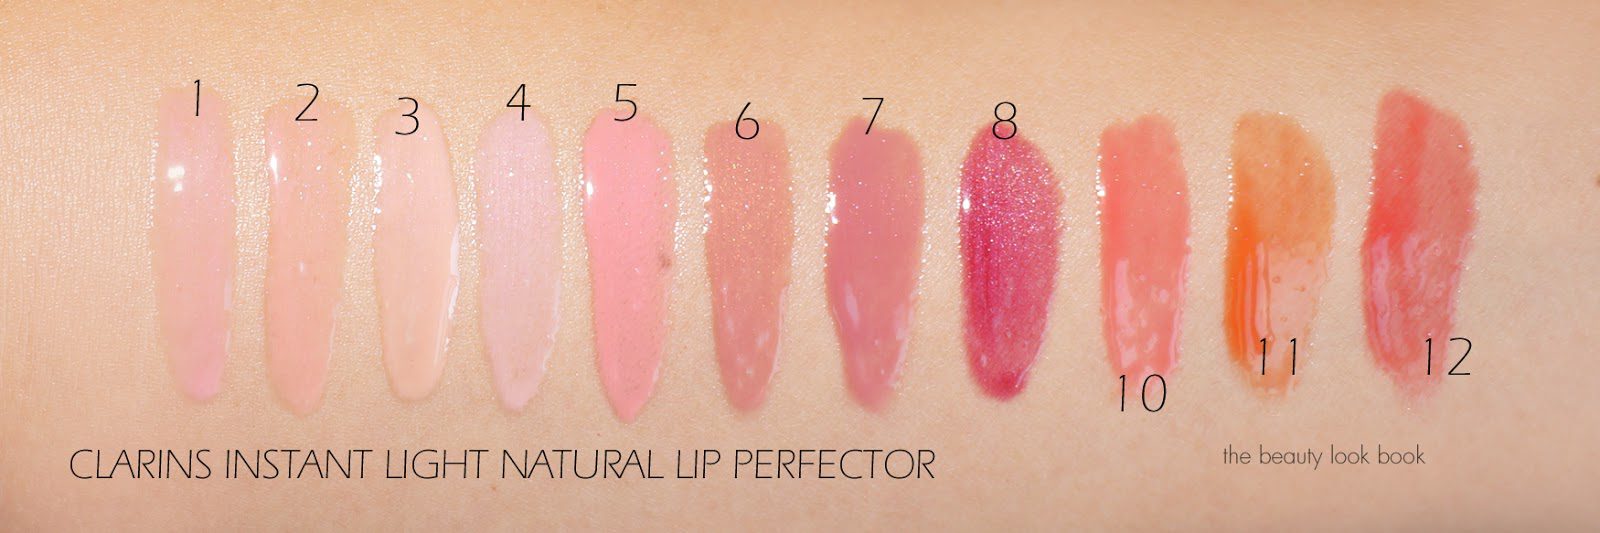 Clarins Instant Light Natural Lip Perfector Swatches - The Beauty Look Book